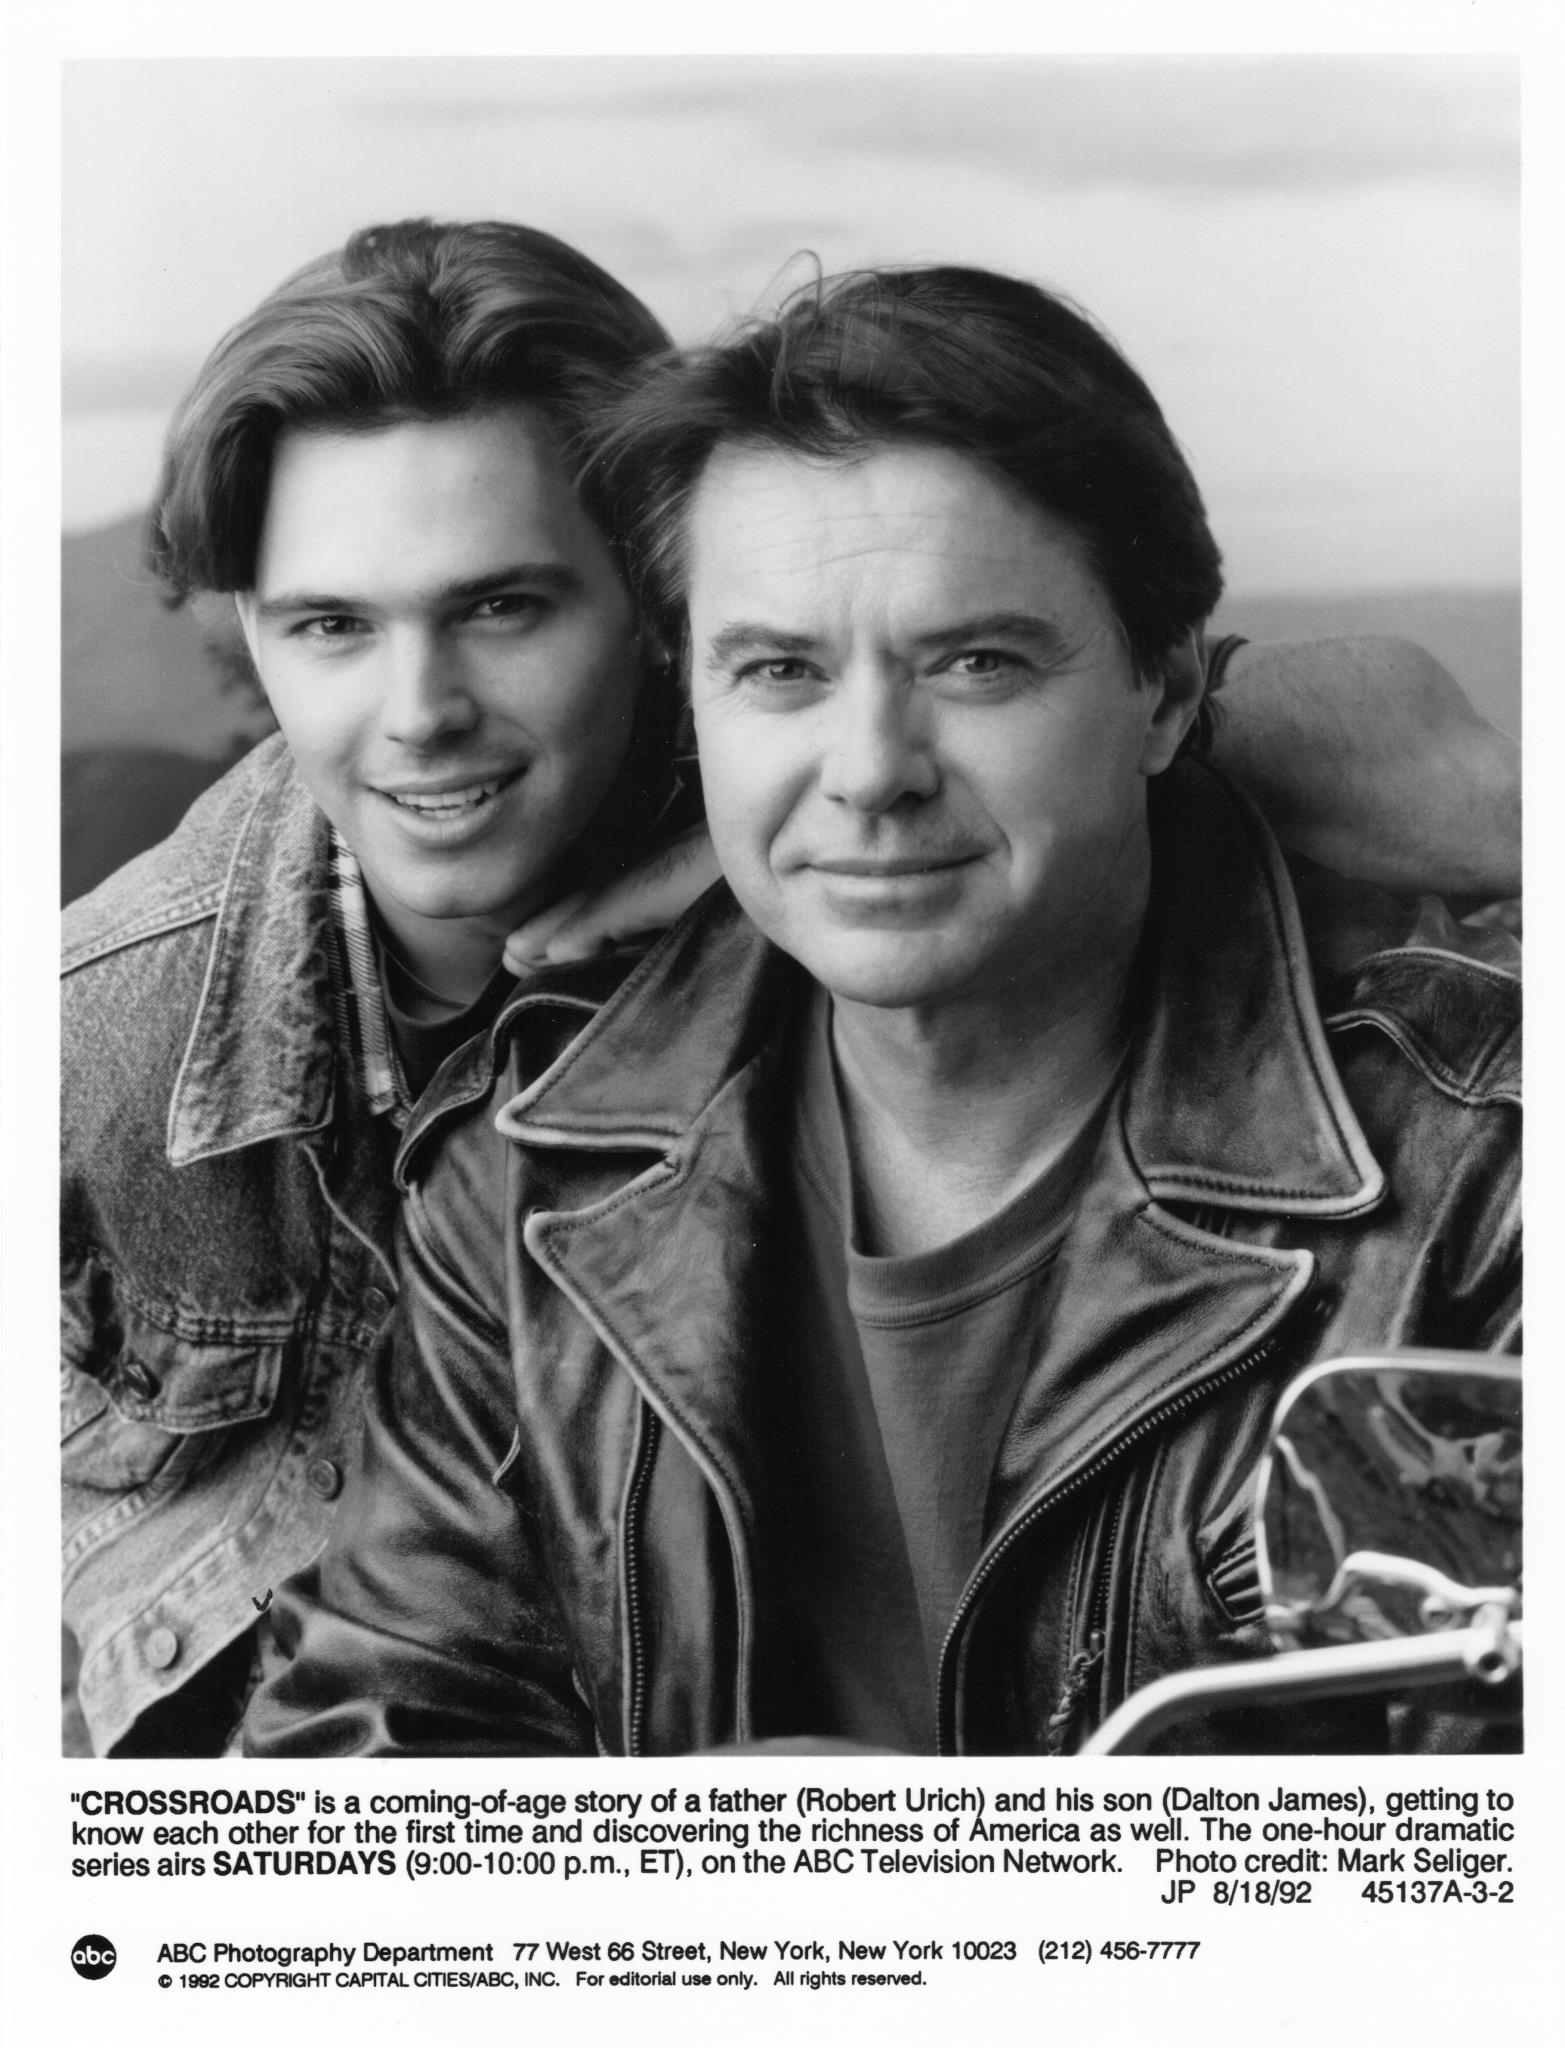 Dalton James and Robert Urich in 